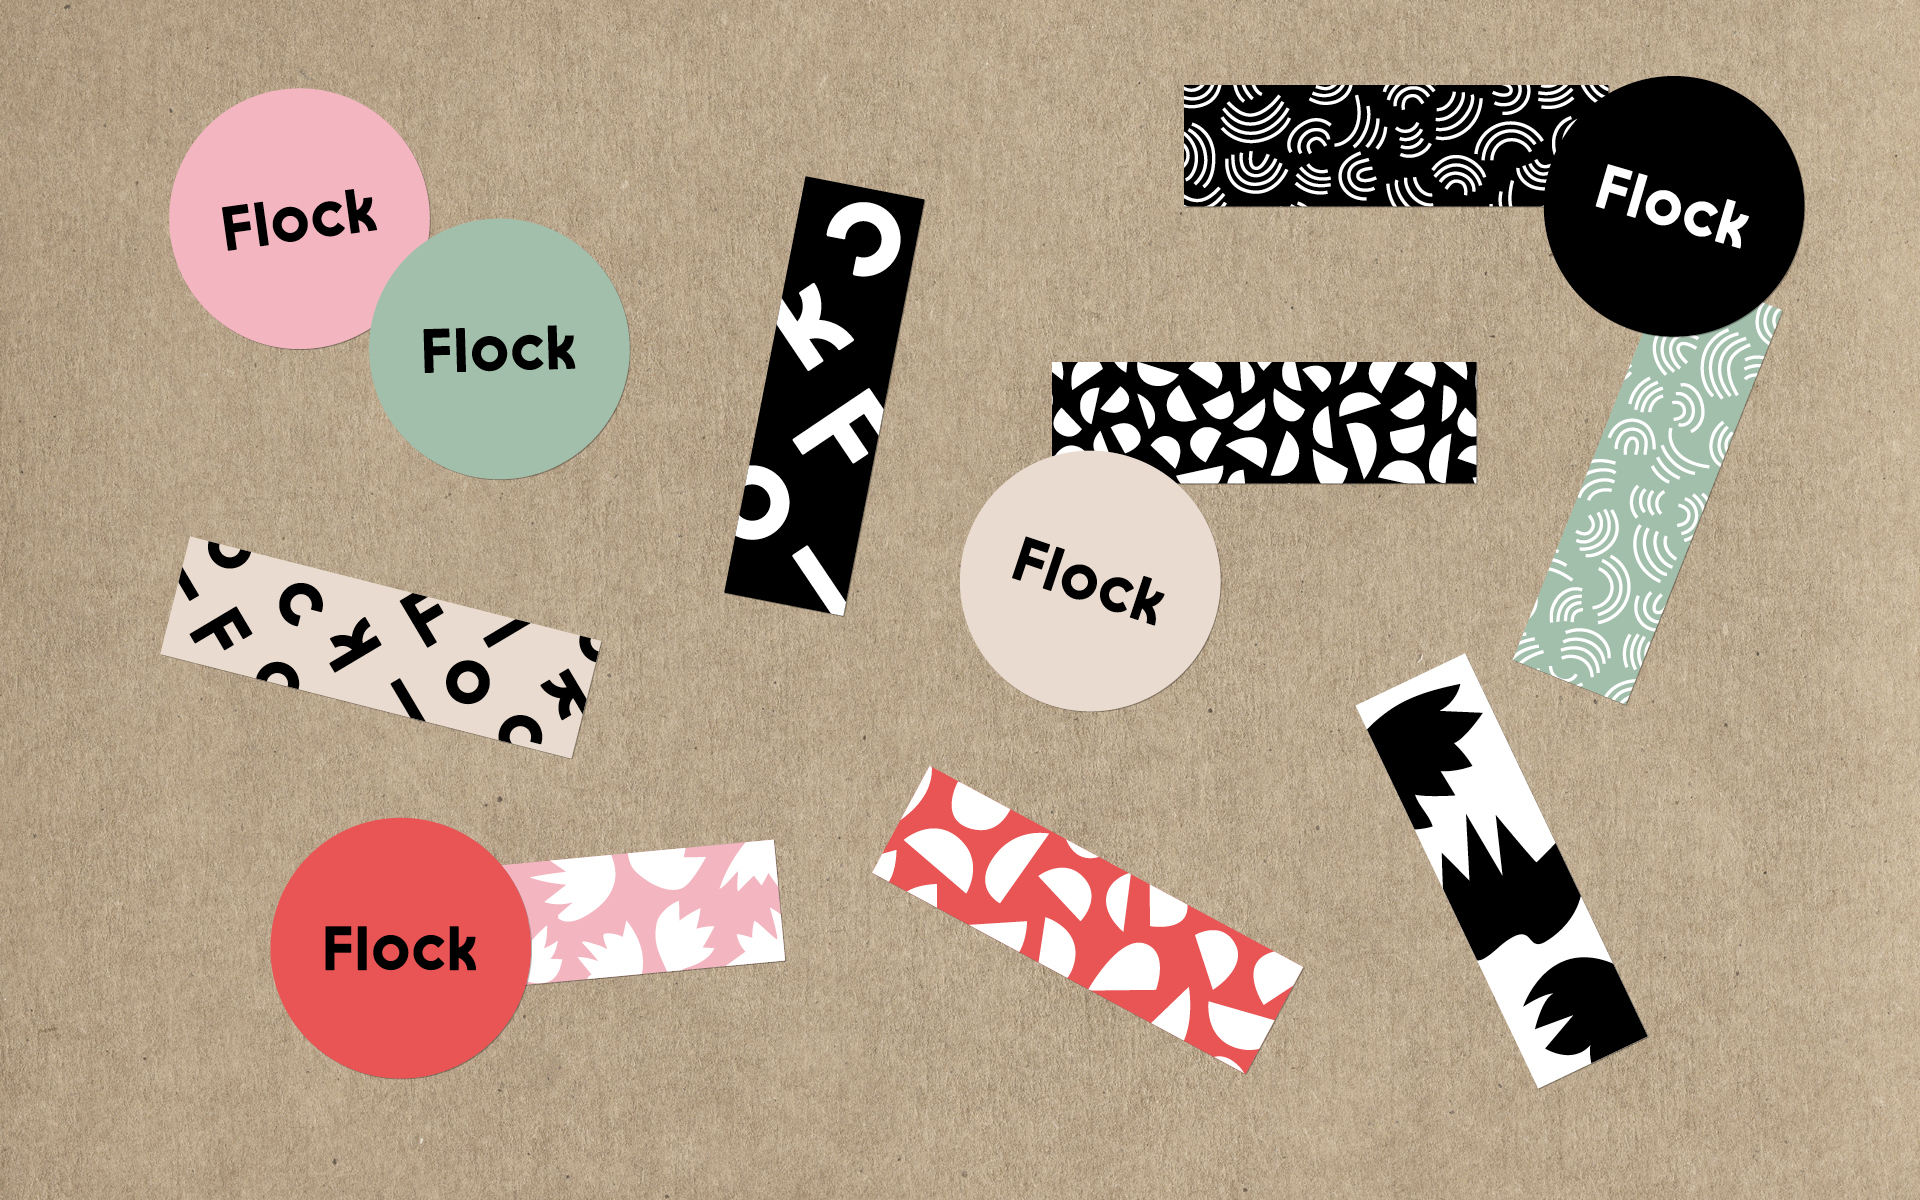 Flock stickers and brand pattern